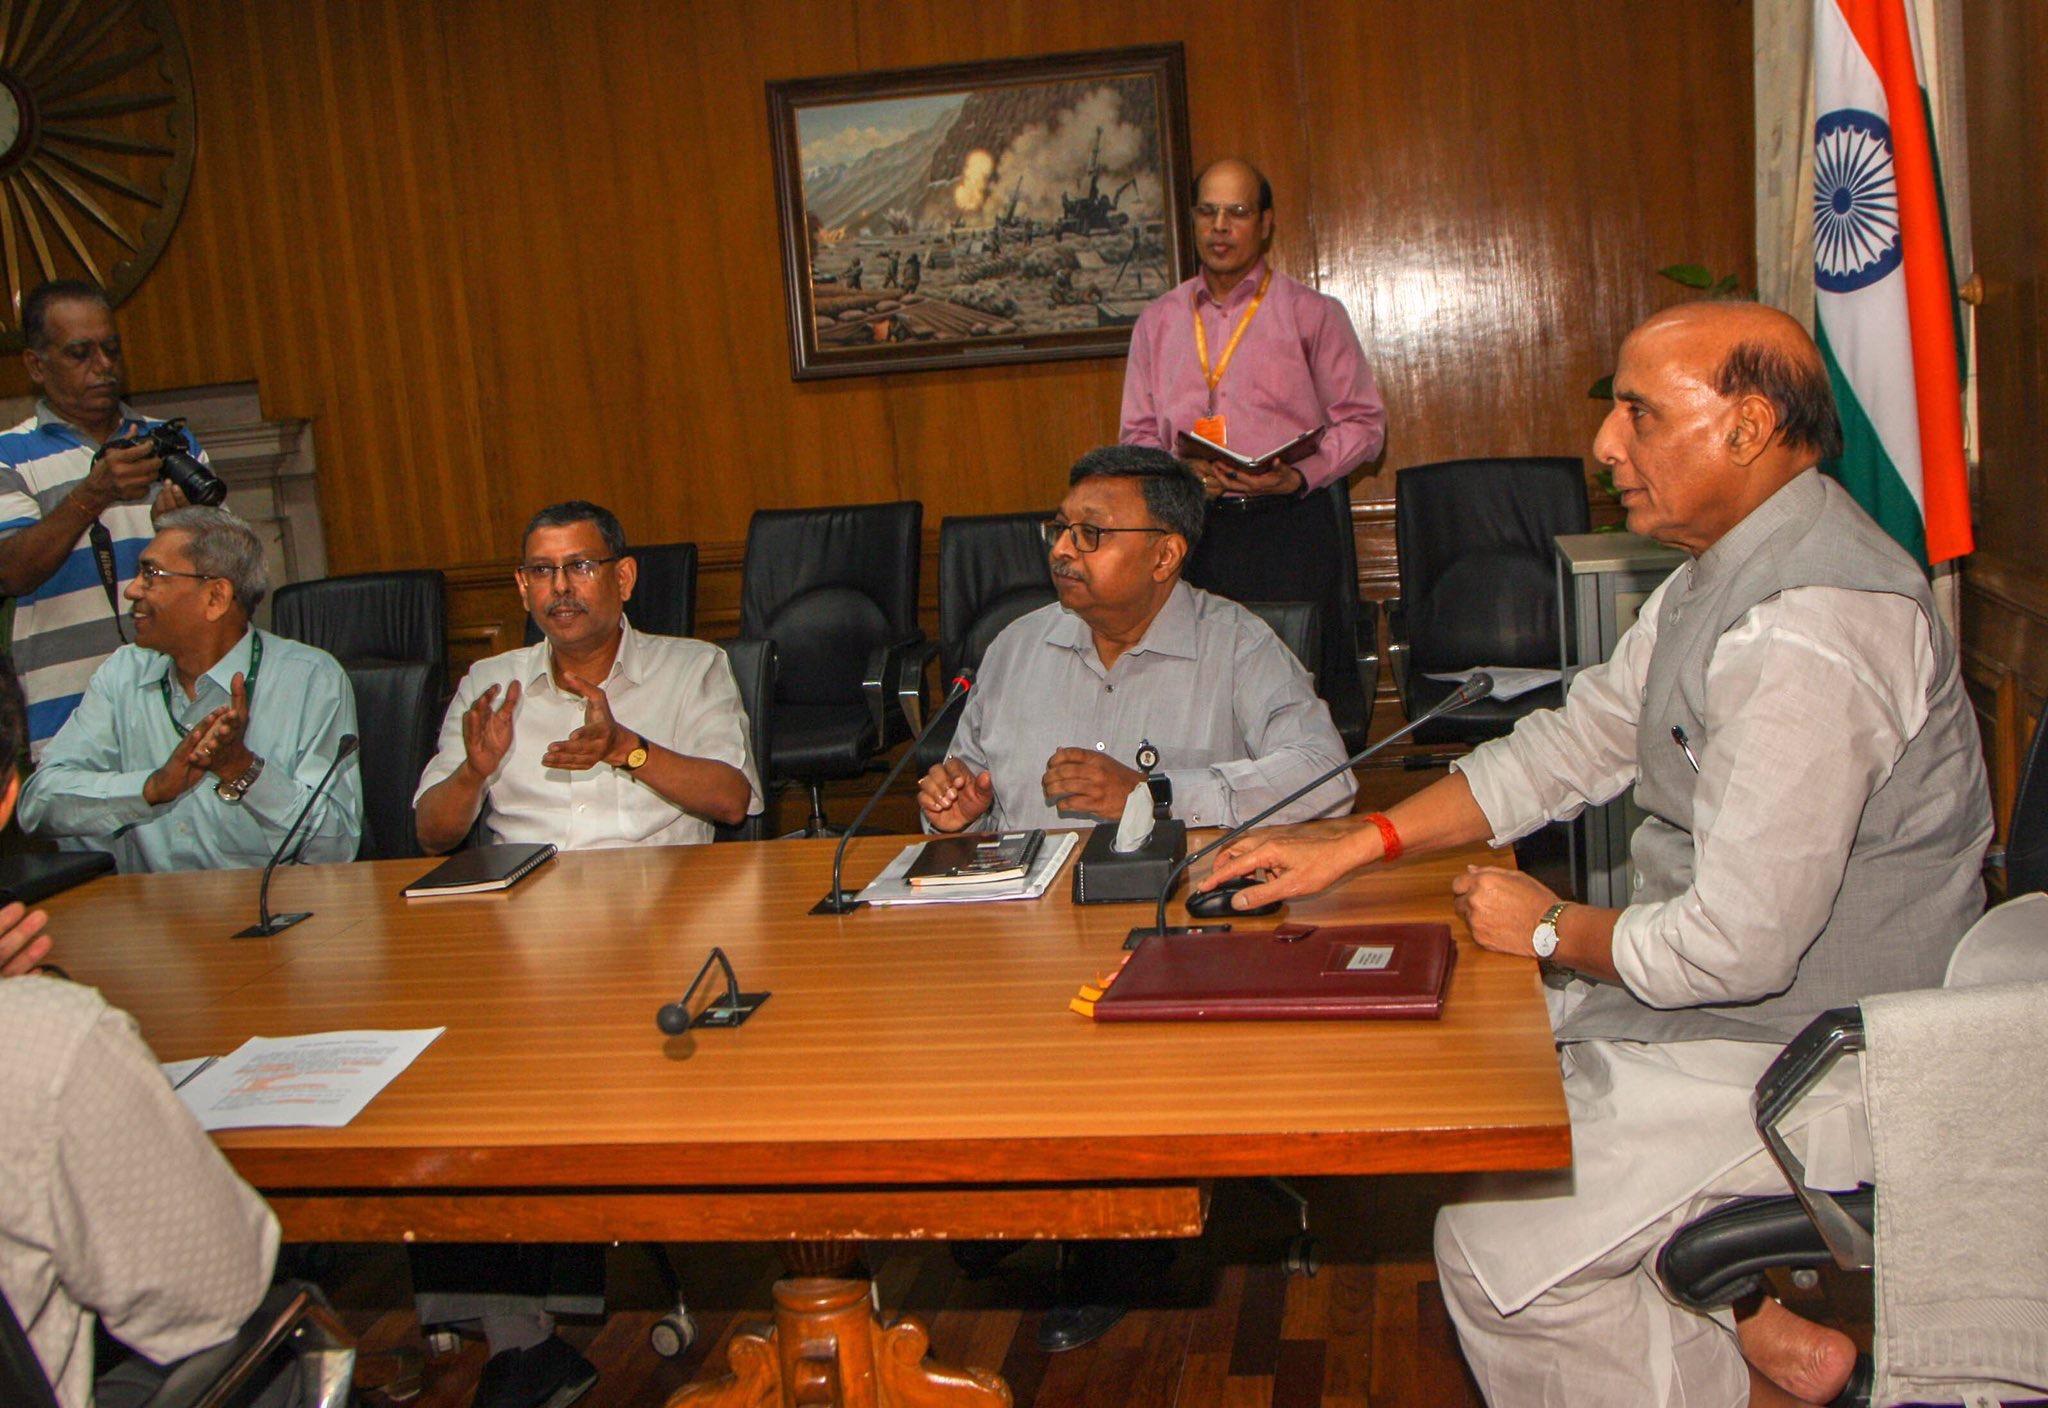 Defence Minister Rajnath Singh launches DefExpo website